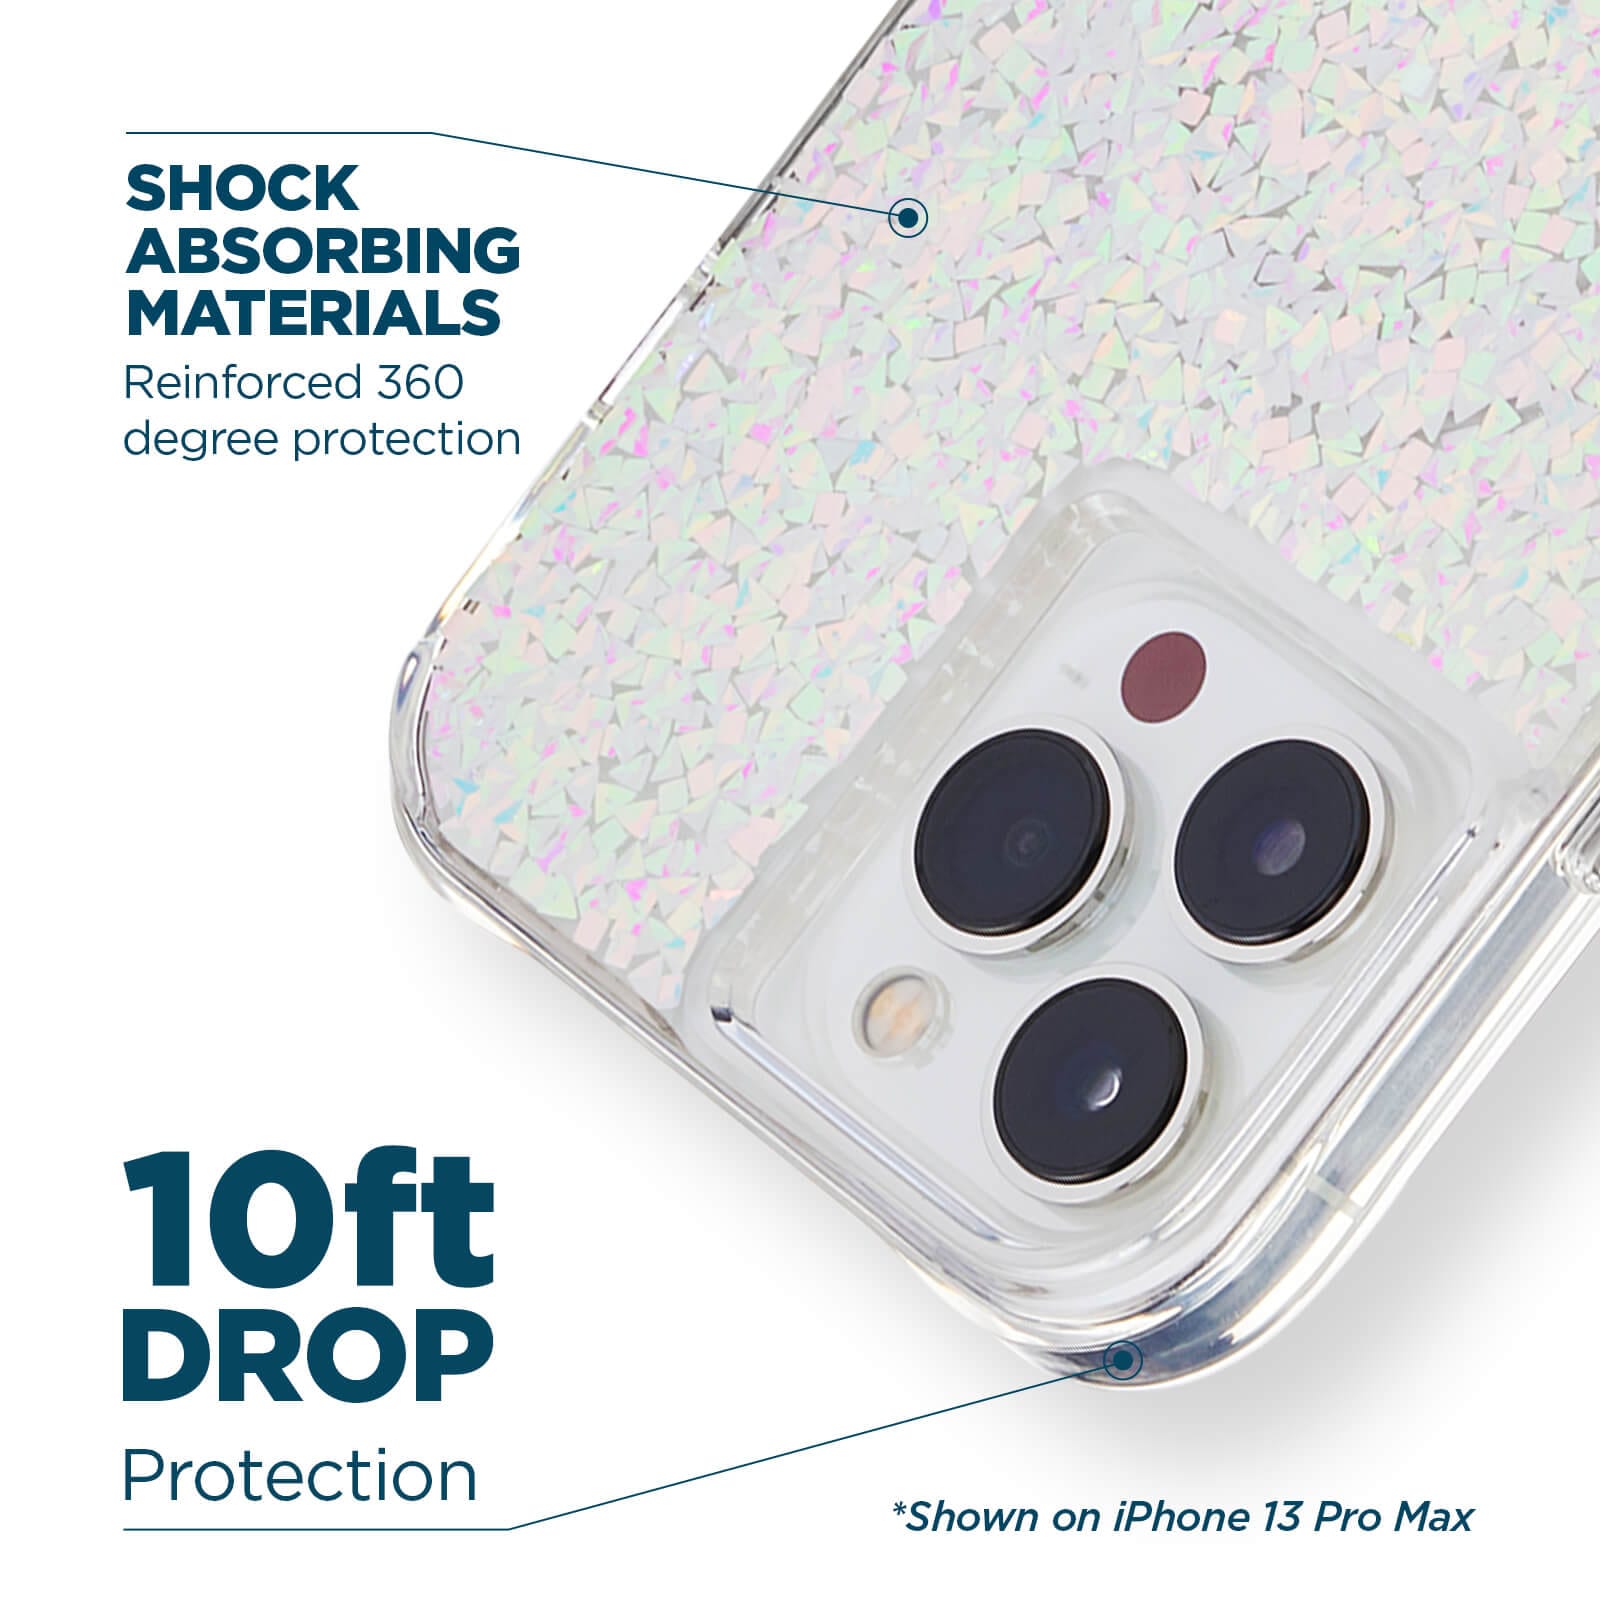 Shock absorbing materials reinforced 360 degree protection. 10 ft drop protection. Shown on iPhone 13 Pro Max. color::Twinkle Diamond